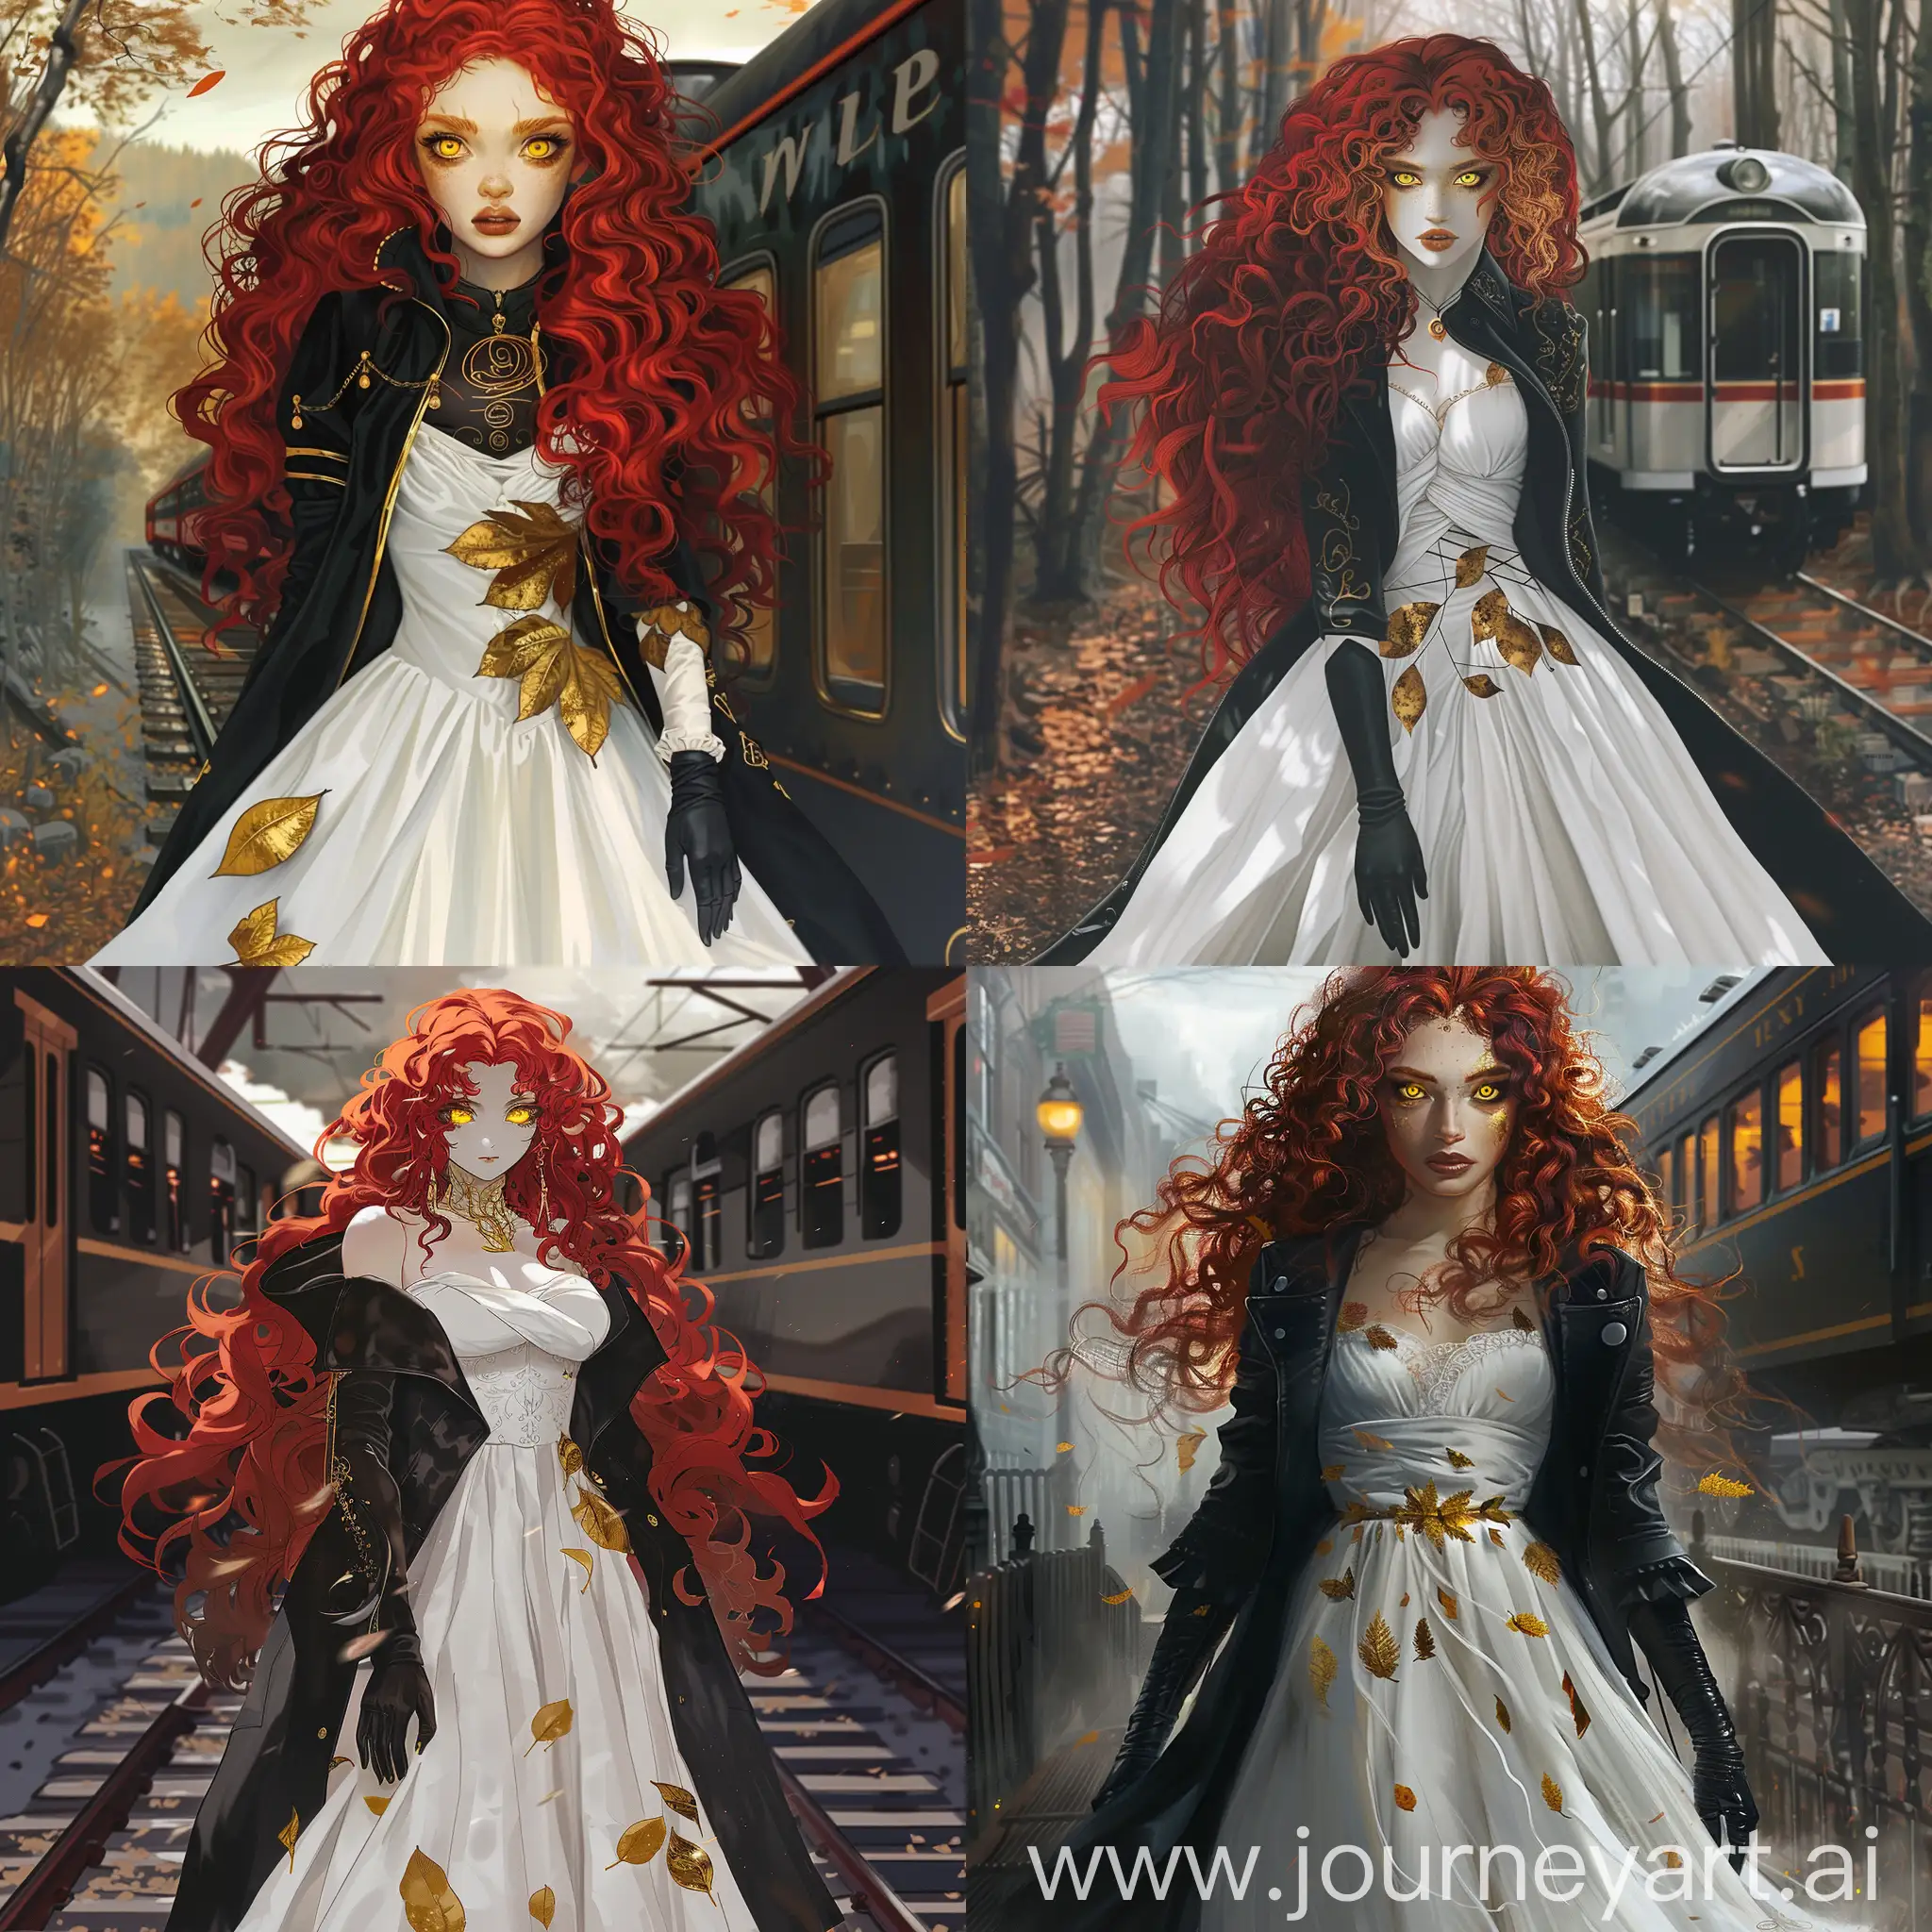 Enchanting-Woman-with-Red-Curly-Hair-and-Golden-Leaves-Dress